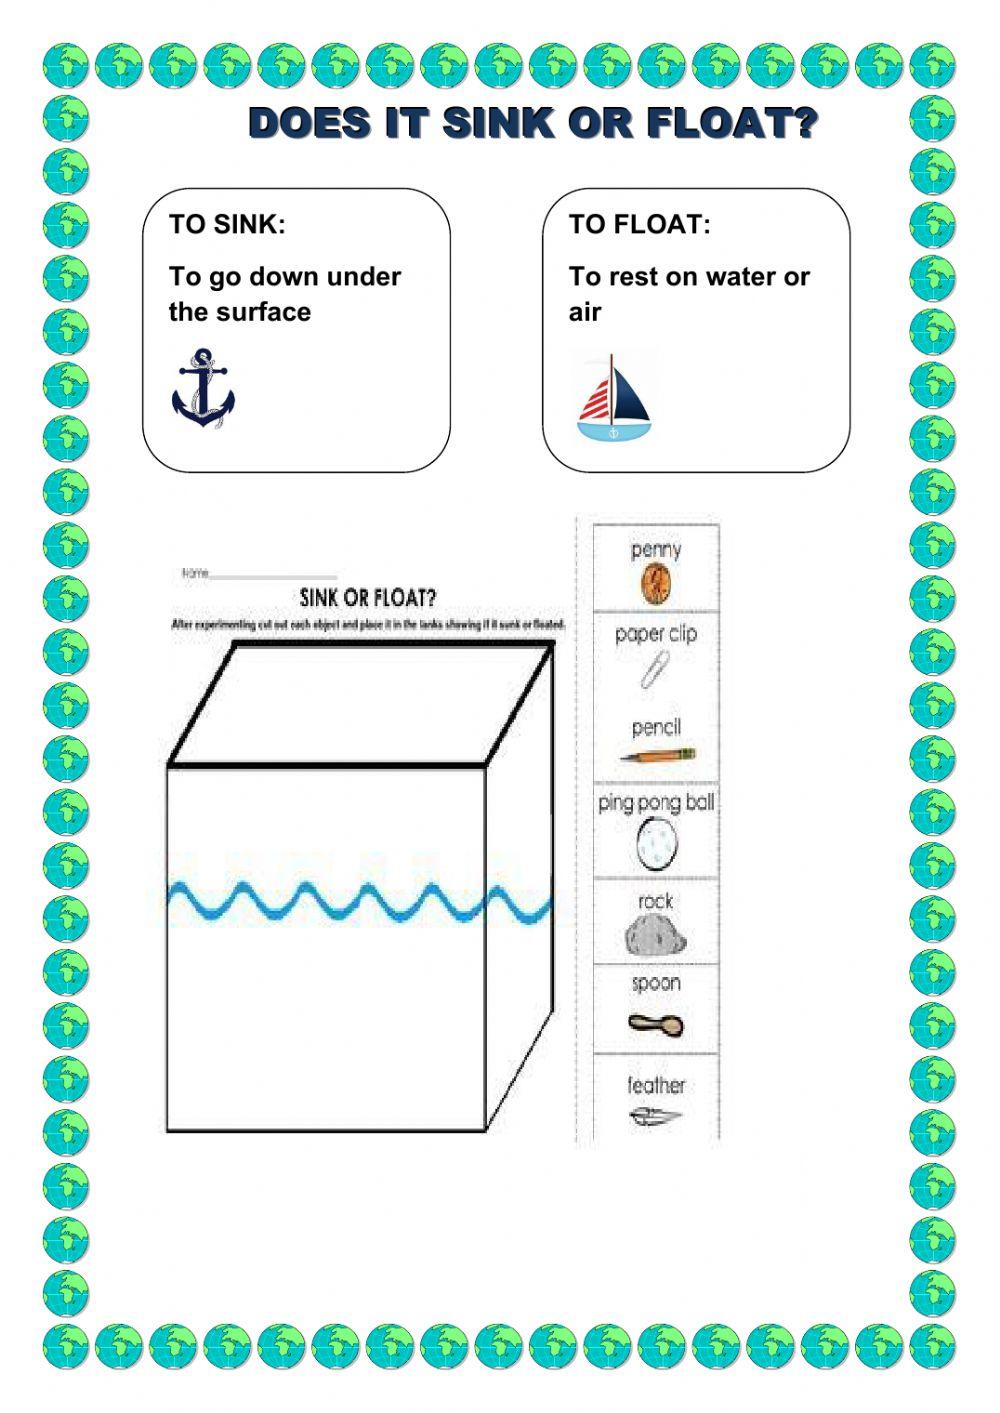 Water use. Sink or float